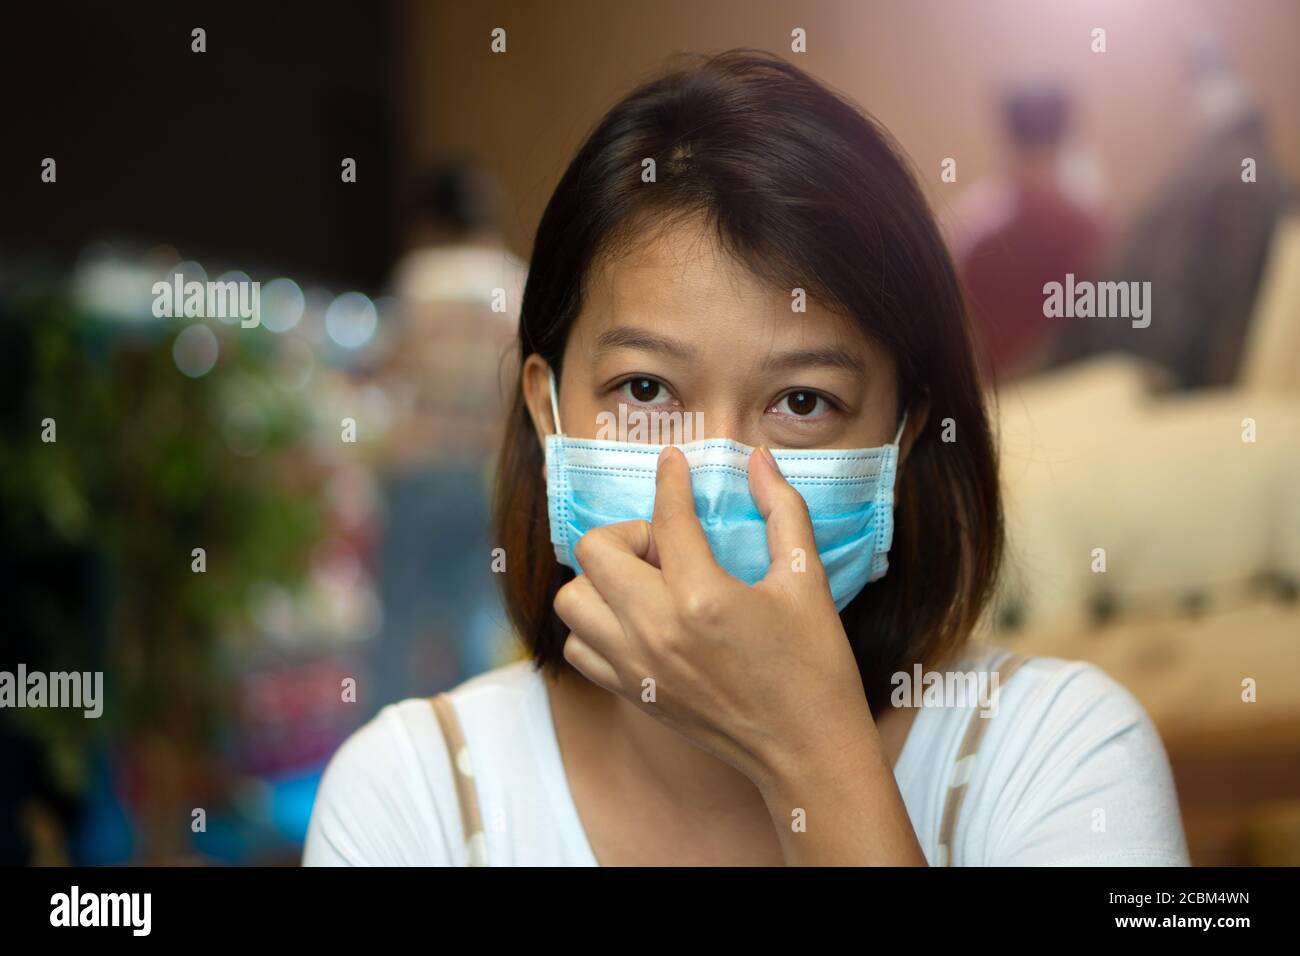 Asian woman wearing protective mask on her face while being in the coffee shop during virus COVID-19 pandemic. Stock Photo